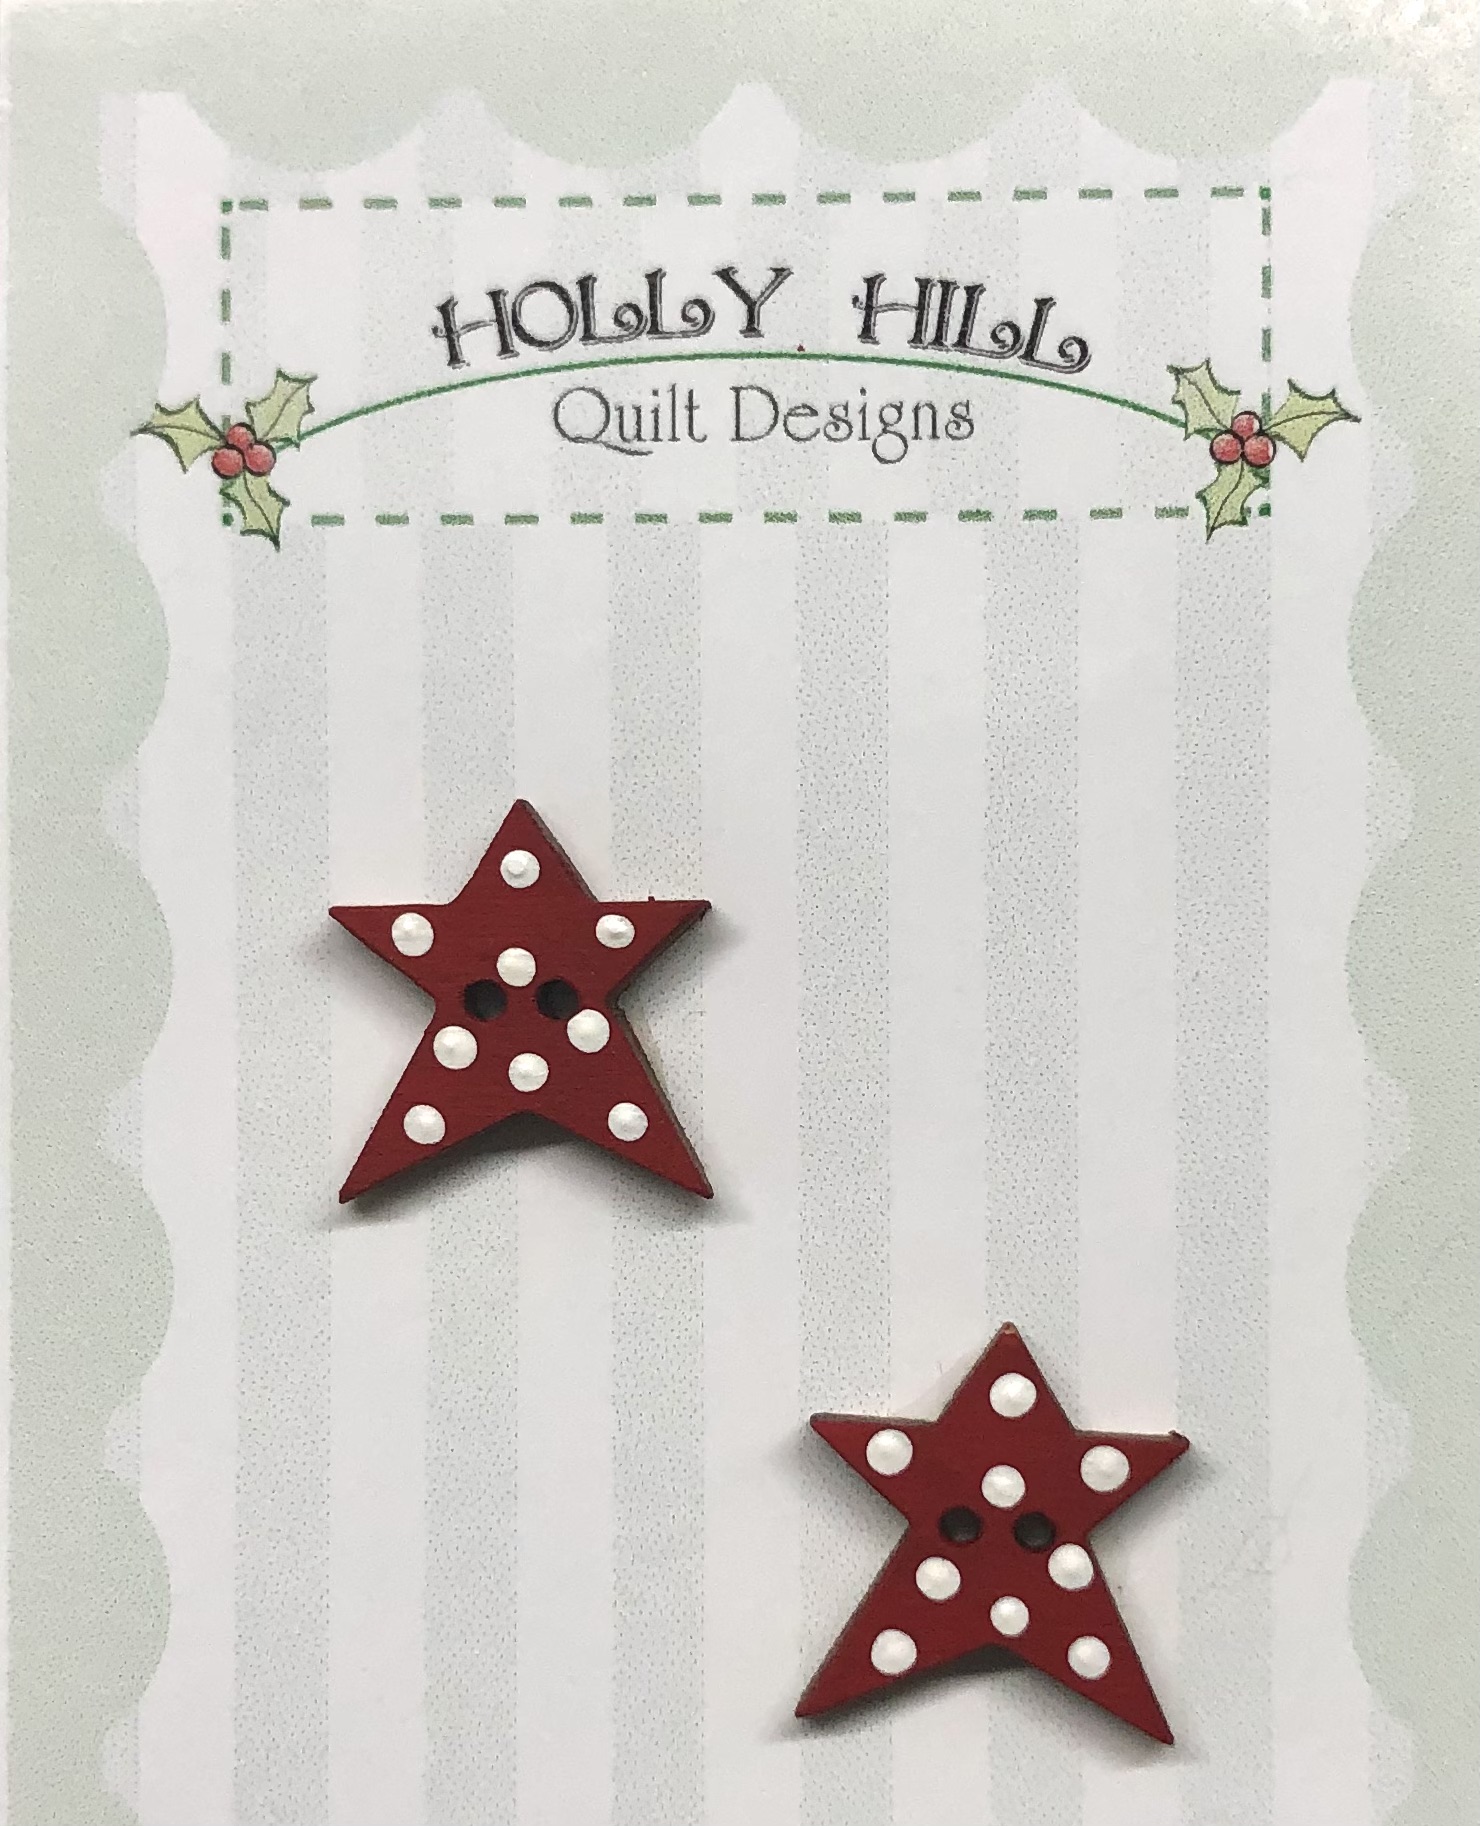 Mary Jane & Friends - The Countdown to the Holidays Ladies Border Block 2 - SANTA'S ARRIVAL PAINTED WOODEN STAR BUTTONS